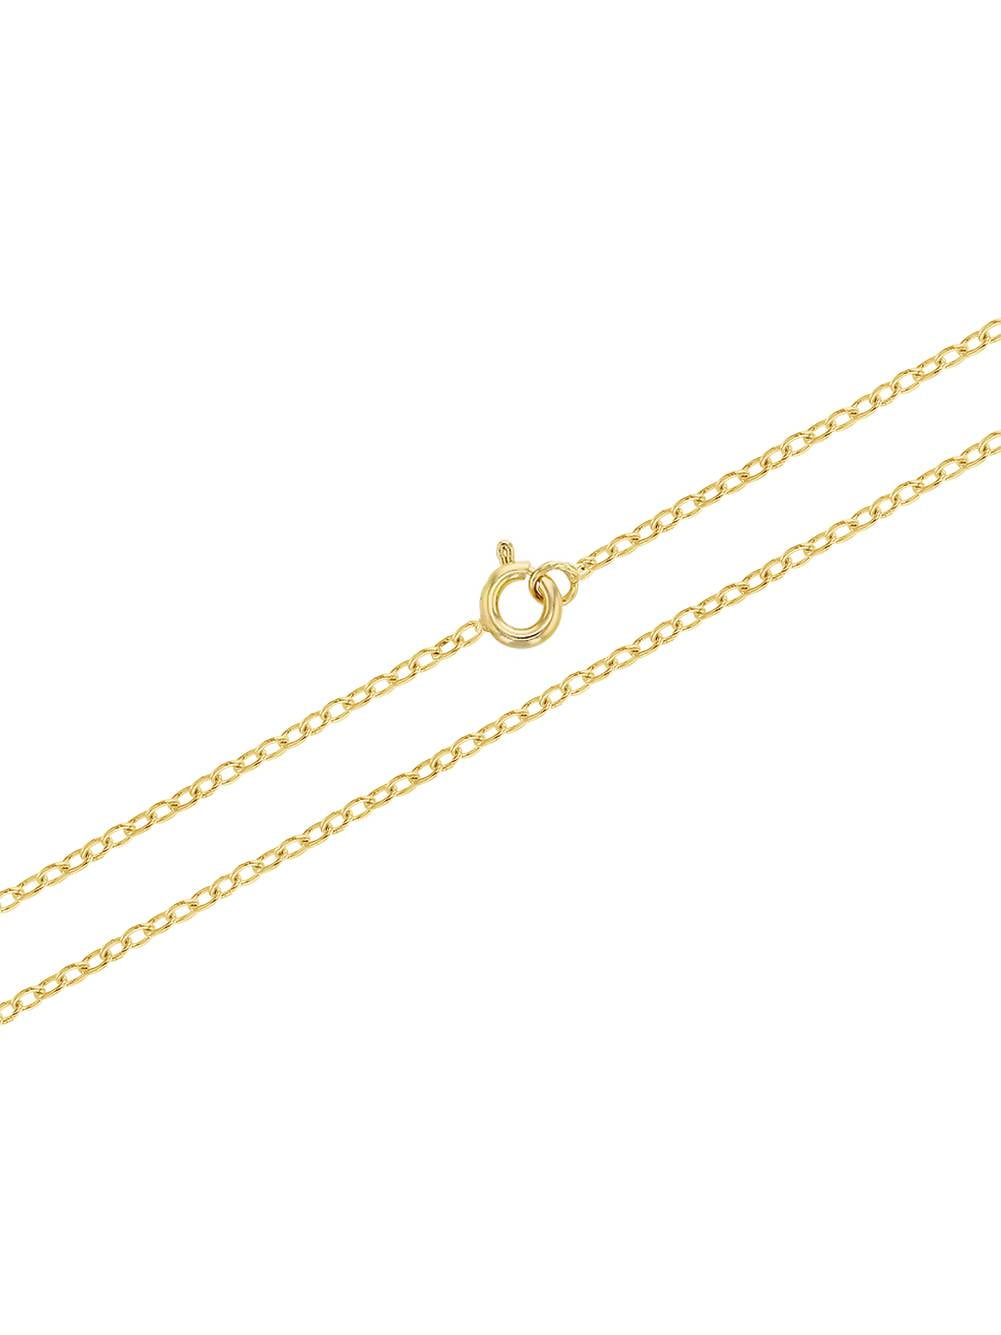 LIFETIME GUARANTEE 16"1mm SQUARE BOX Link 14K Yellow GOLD GL Necklace 